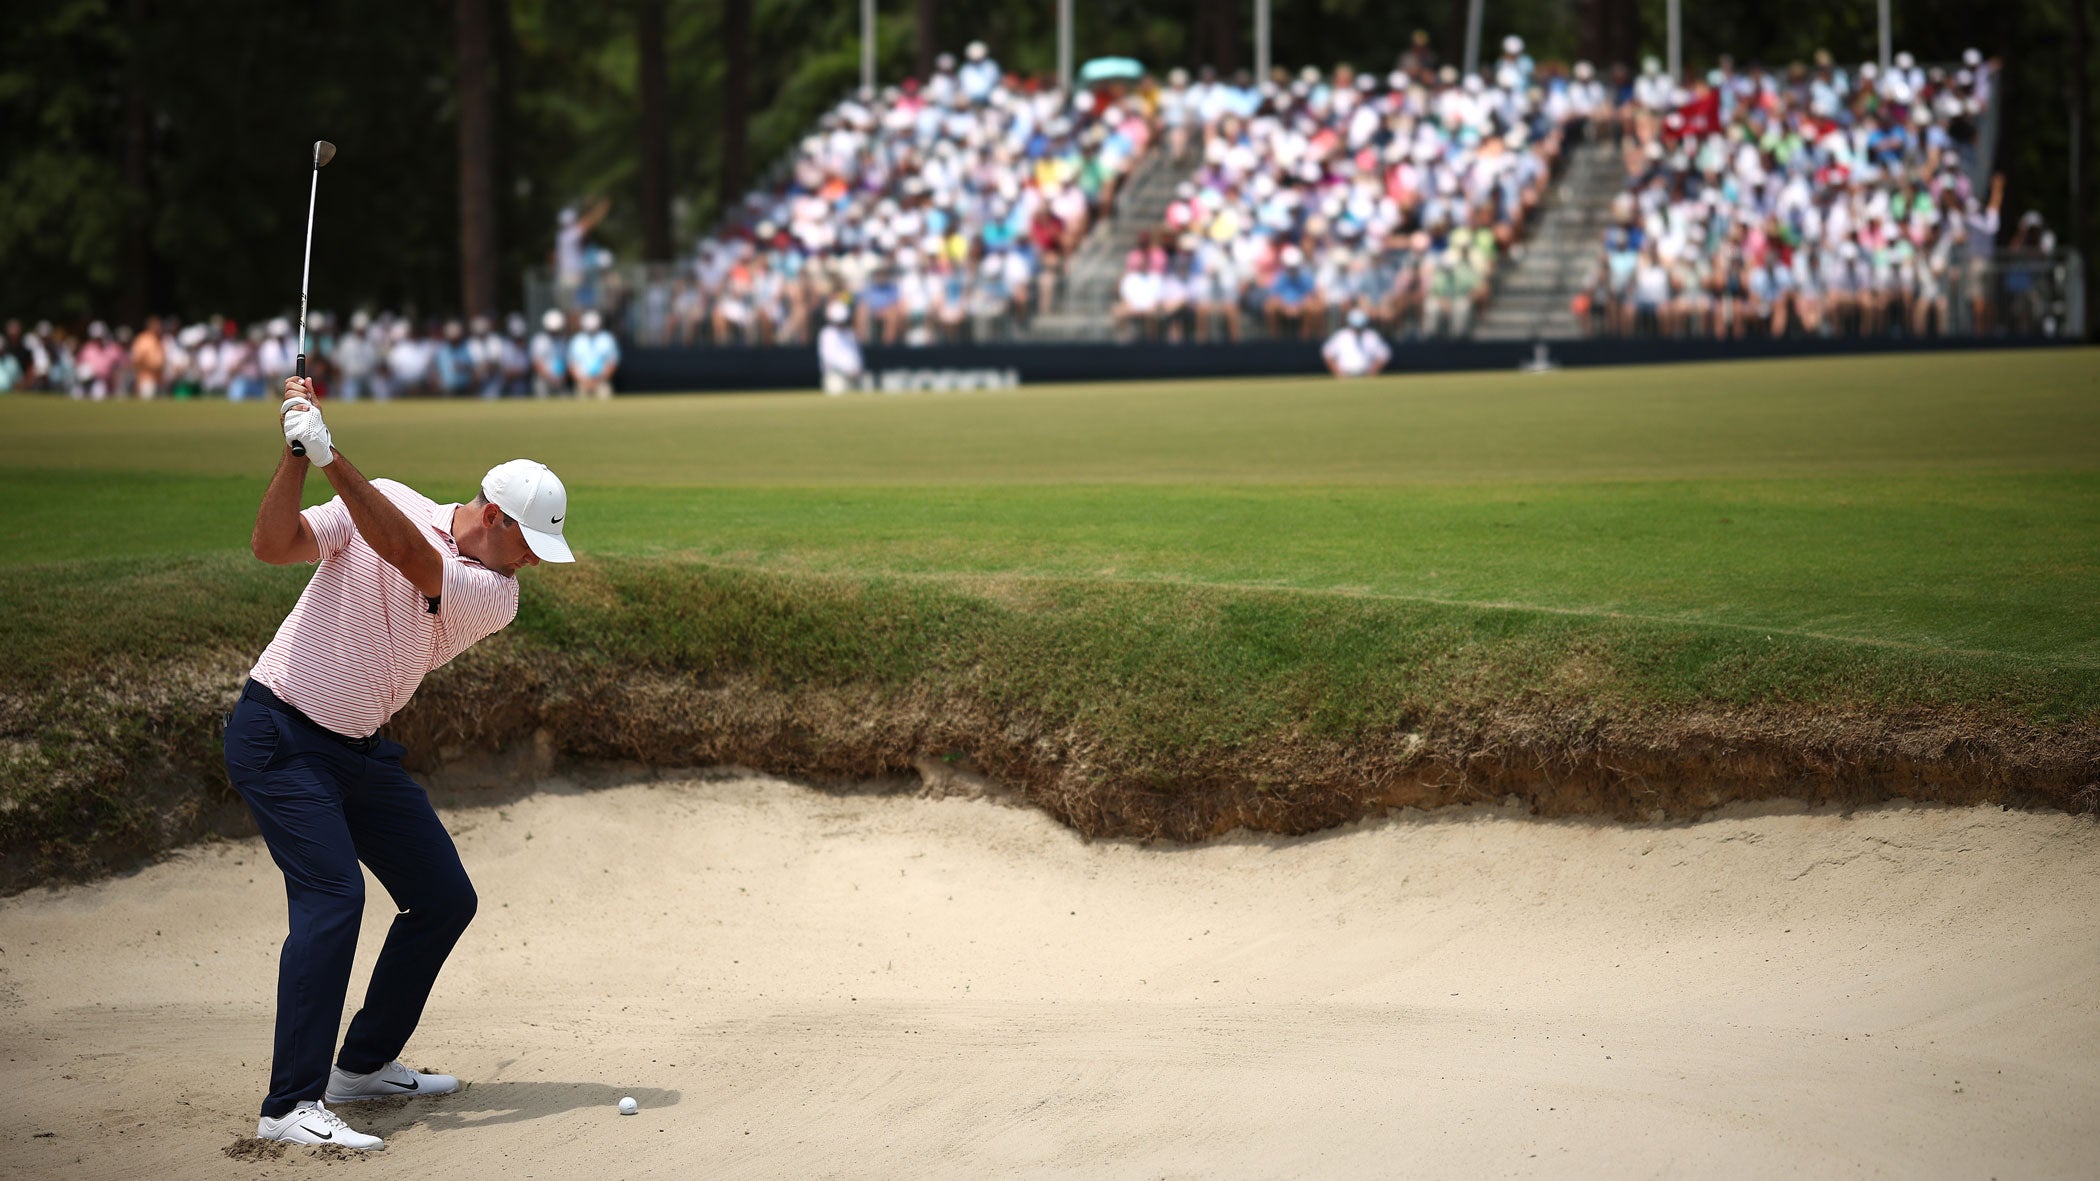 Scottie Scheffler of the United States plays a shot from a bunker on the third hole during the first round of the 124th U.S. Open at Pinehurst Resort